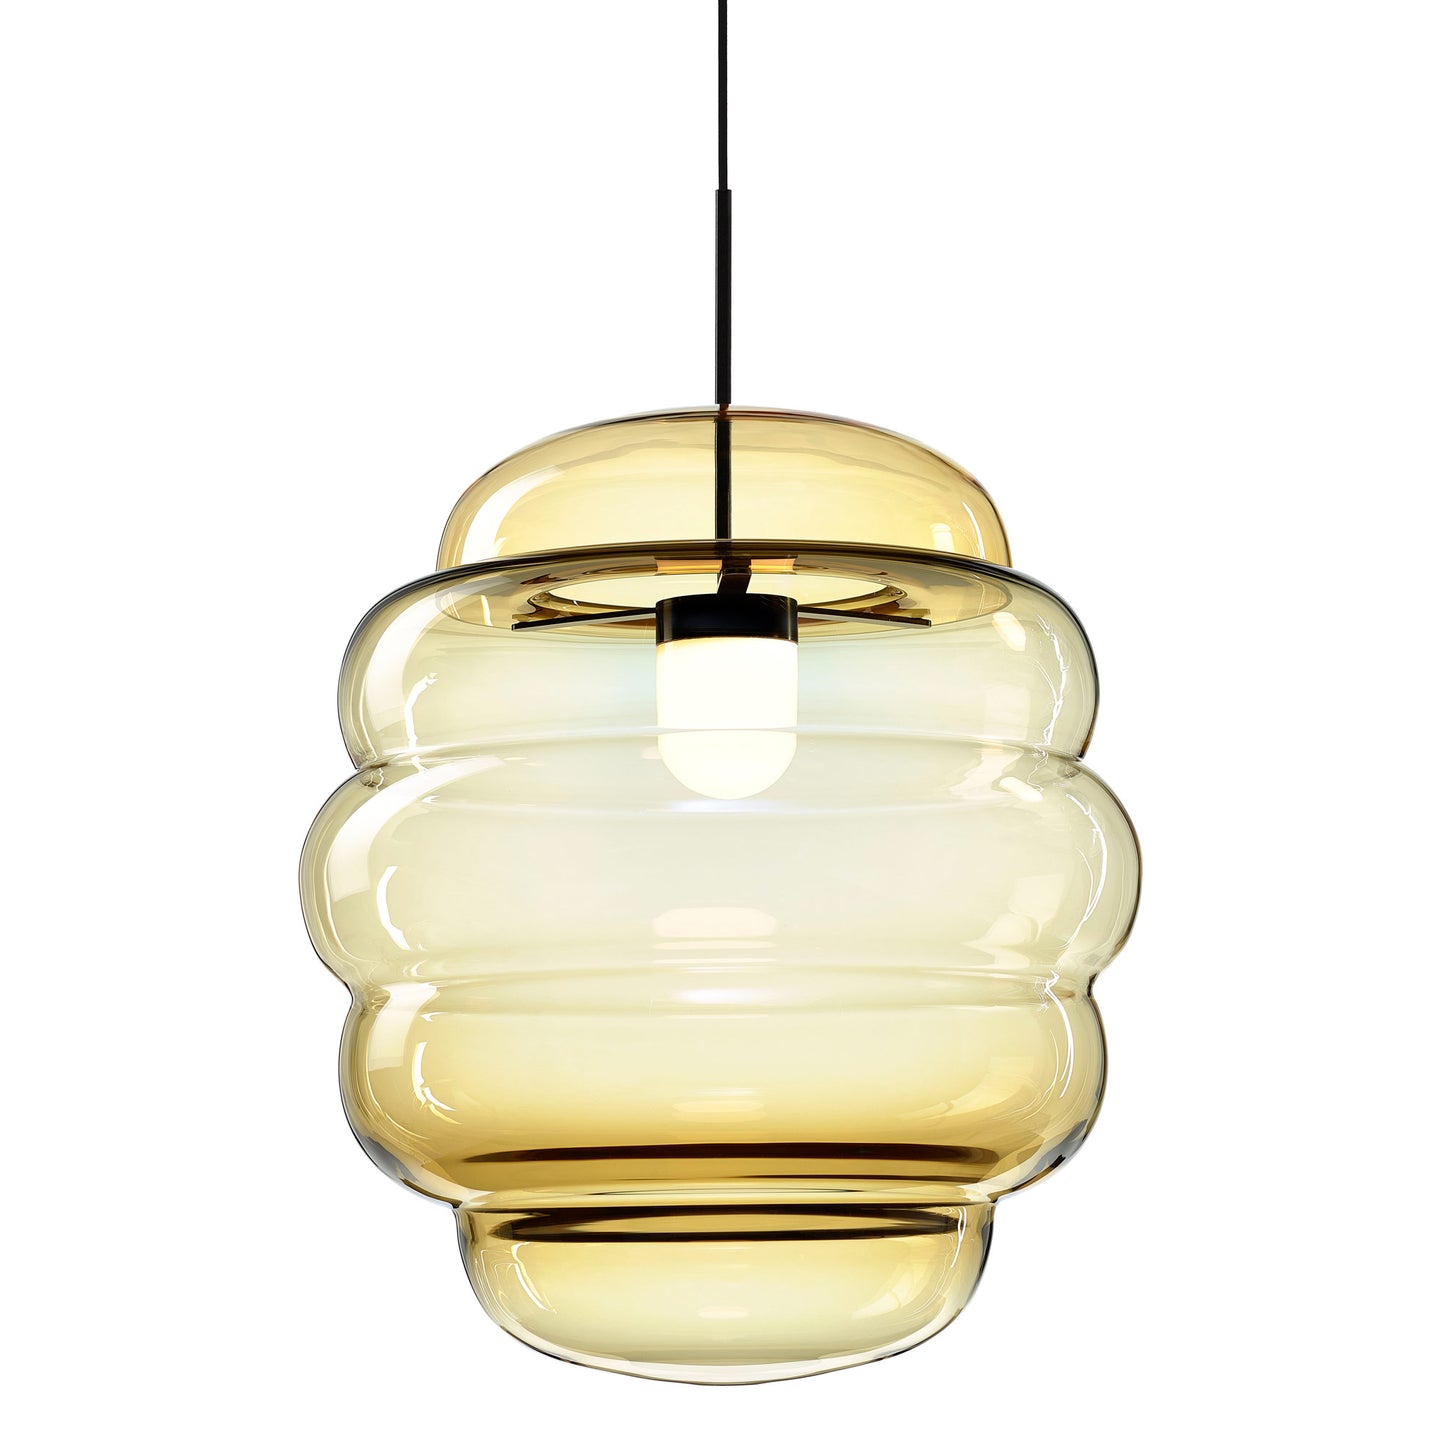 BOMMA - BLIMP PENDANT LARGE - from $4,218.50